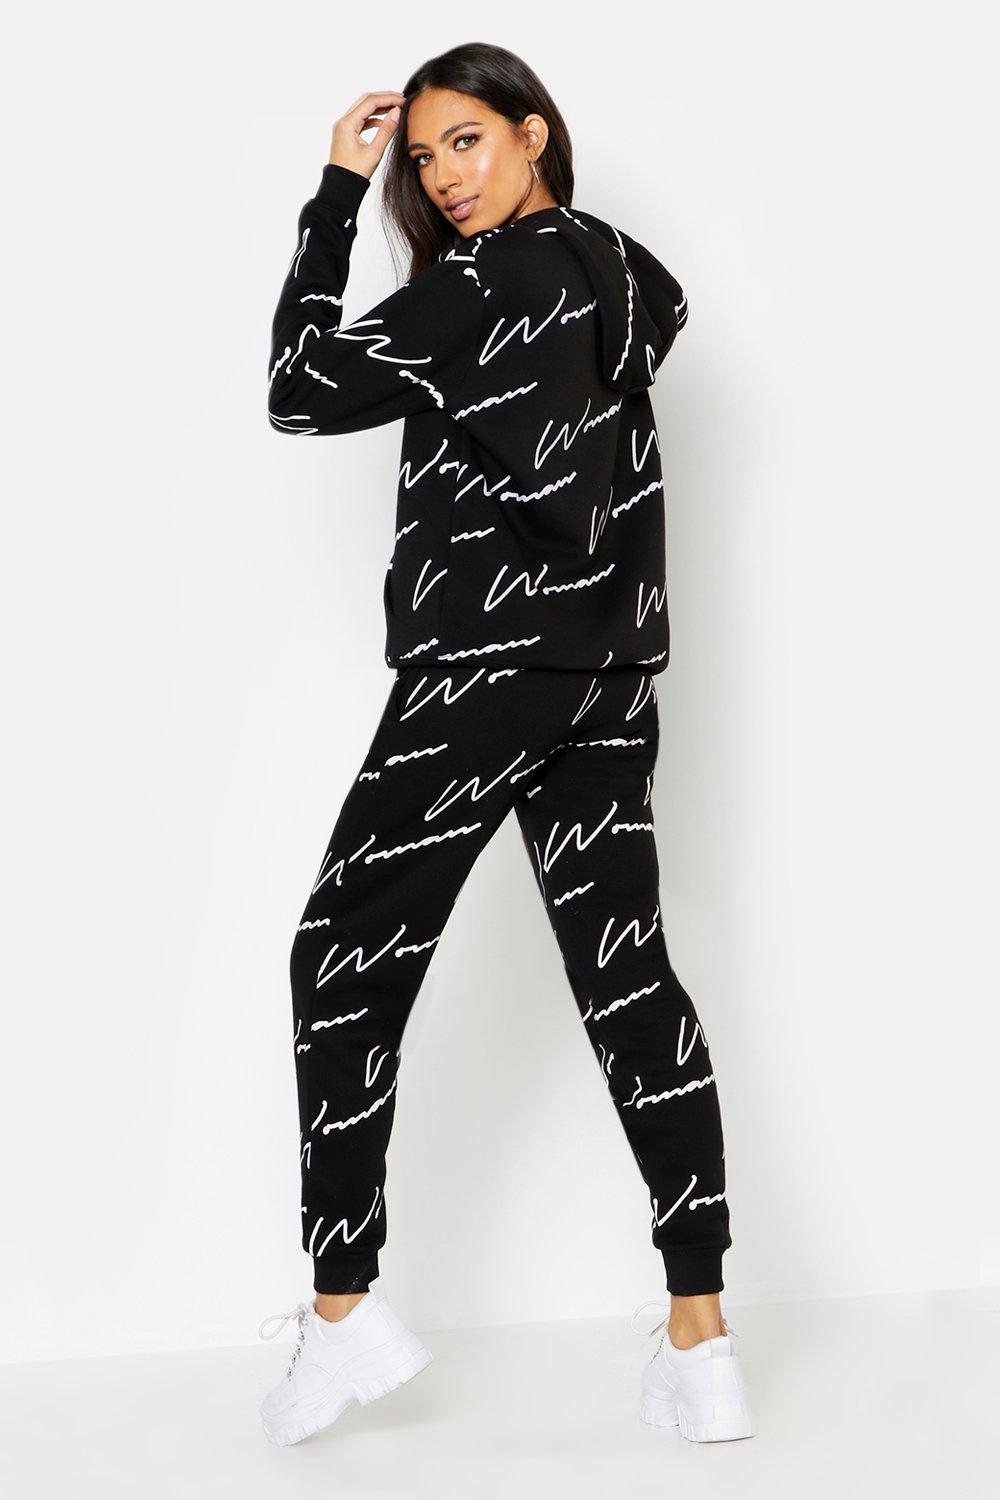 Boohoo Woman All Over Print Tracksuit in Black - Lyst